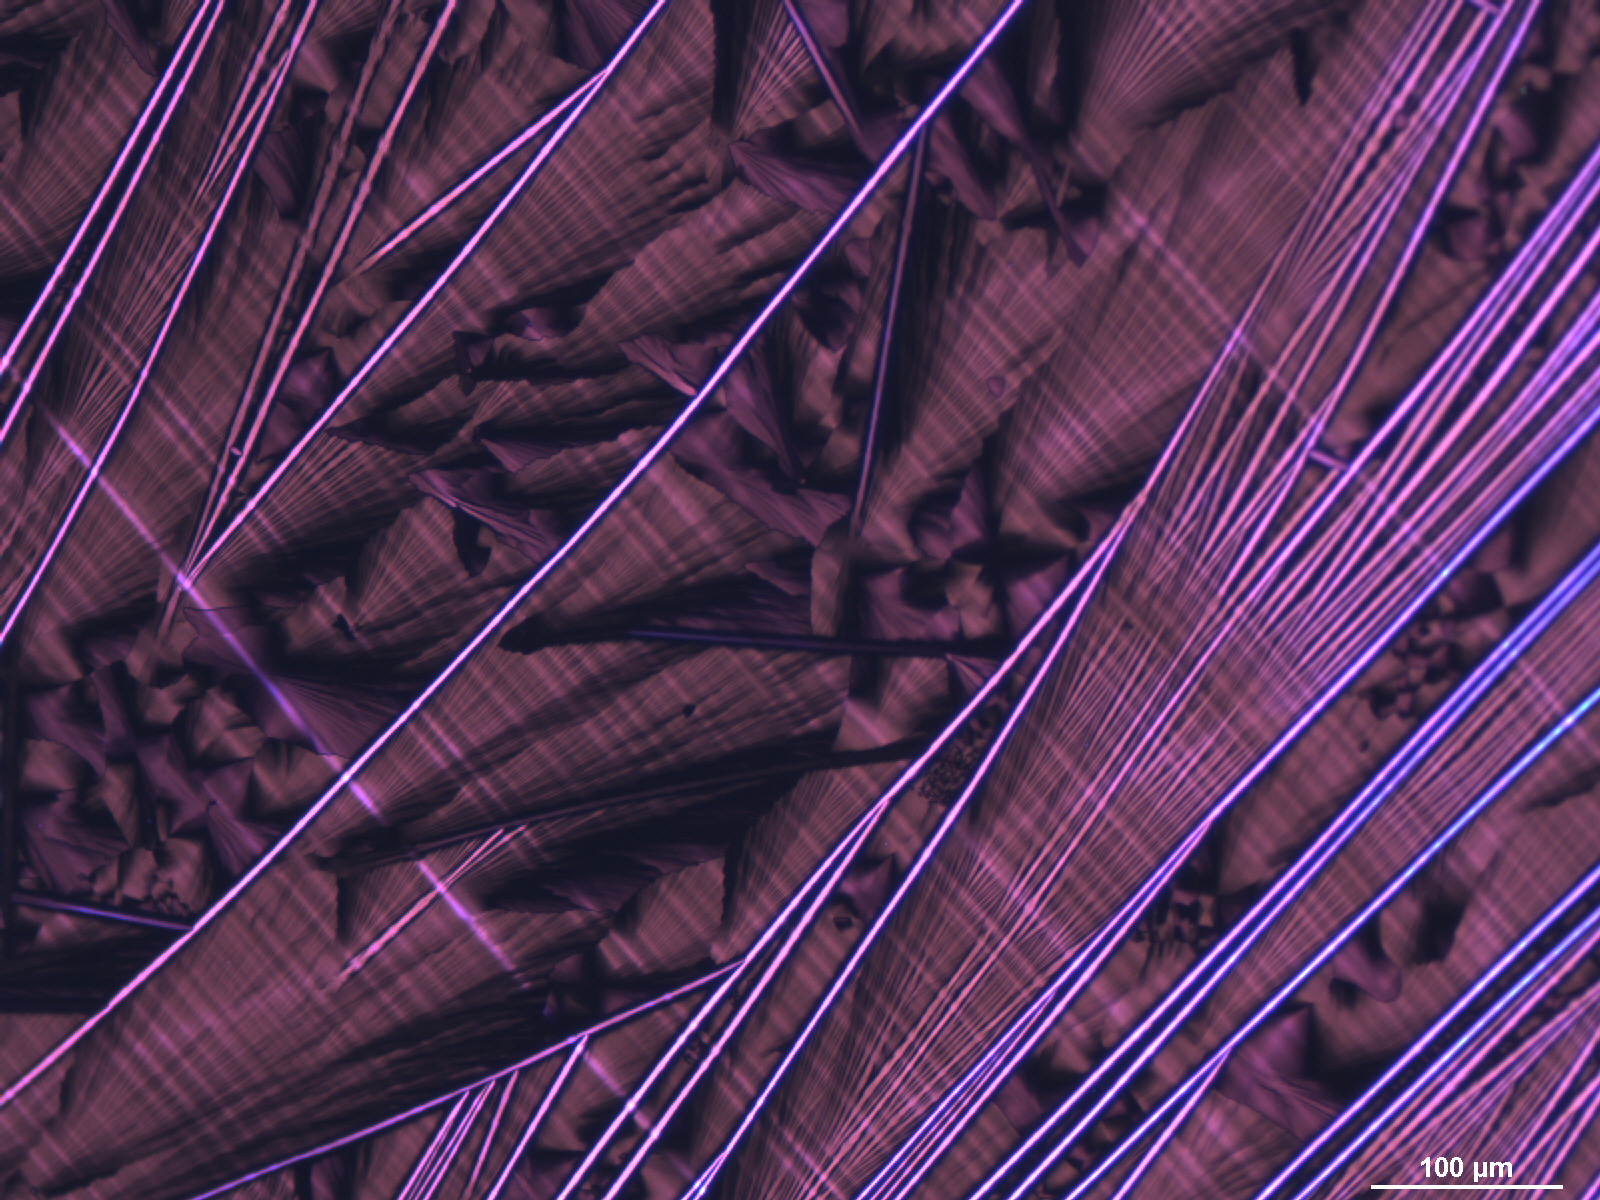 A polarized optical microscopy image of a nanothin film, which looks like neon purple lines against a darker purple backround